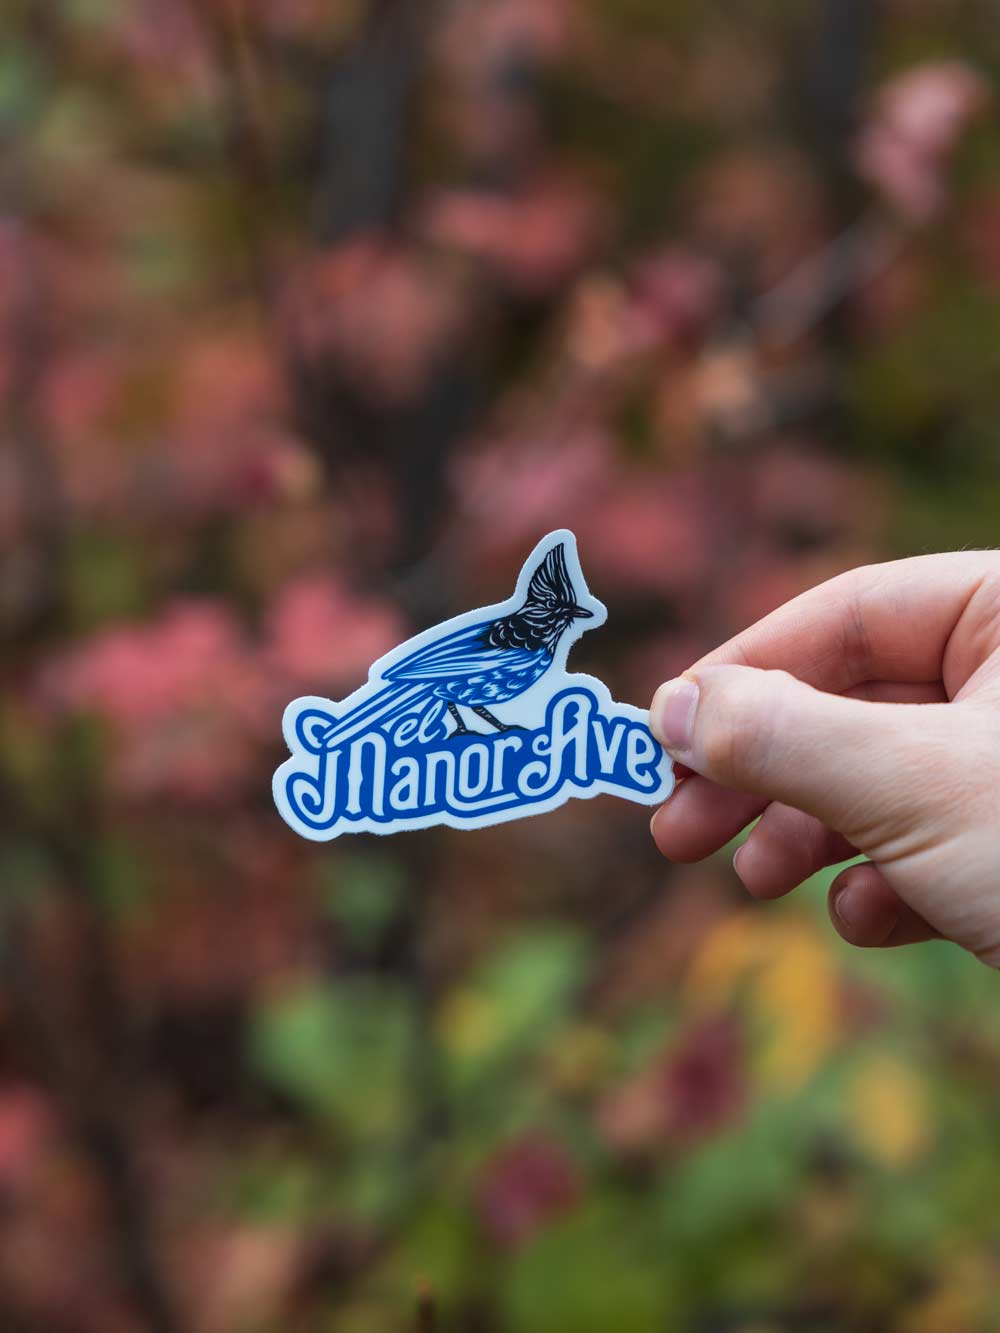 Photo of the El Manor Ave logo sticker being held in the woods with fall colors behind it.